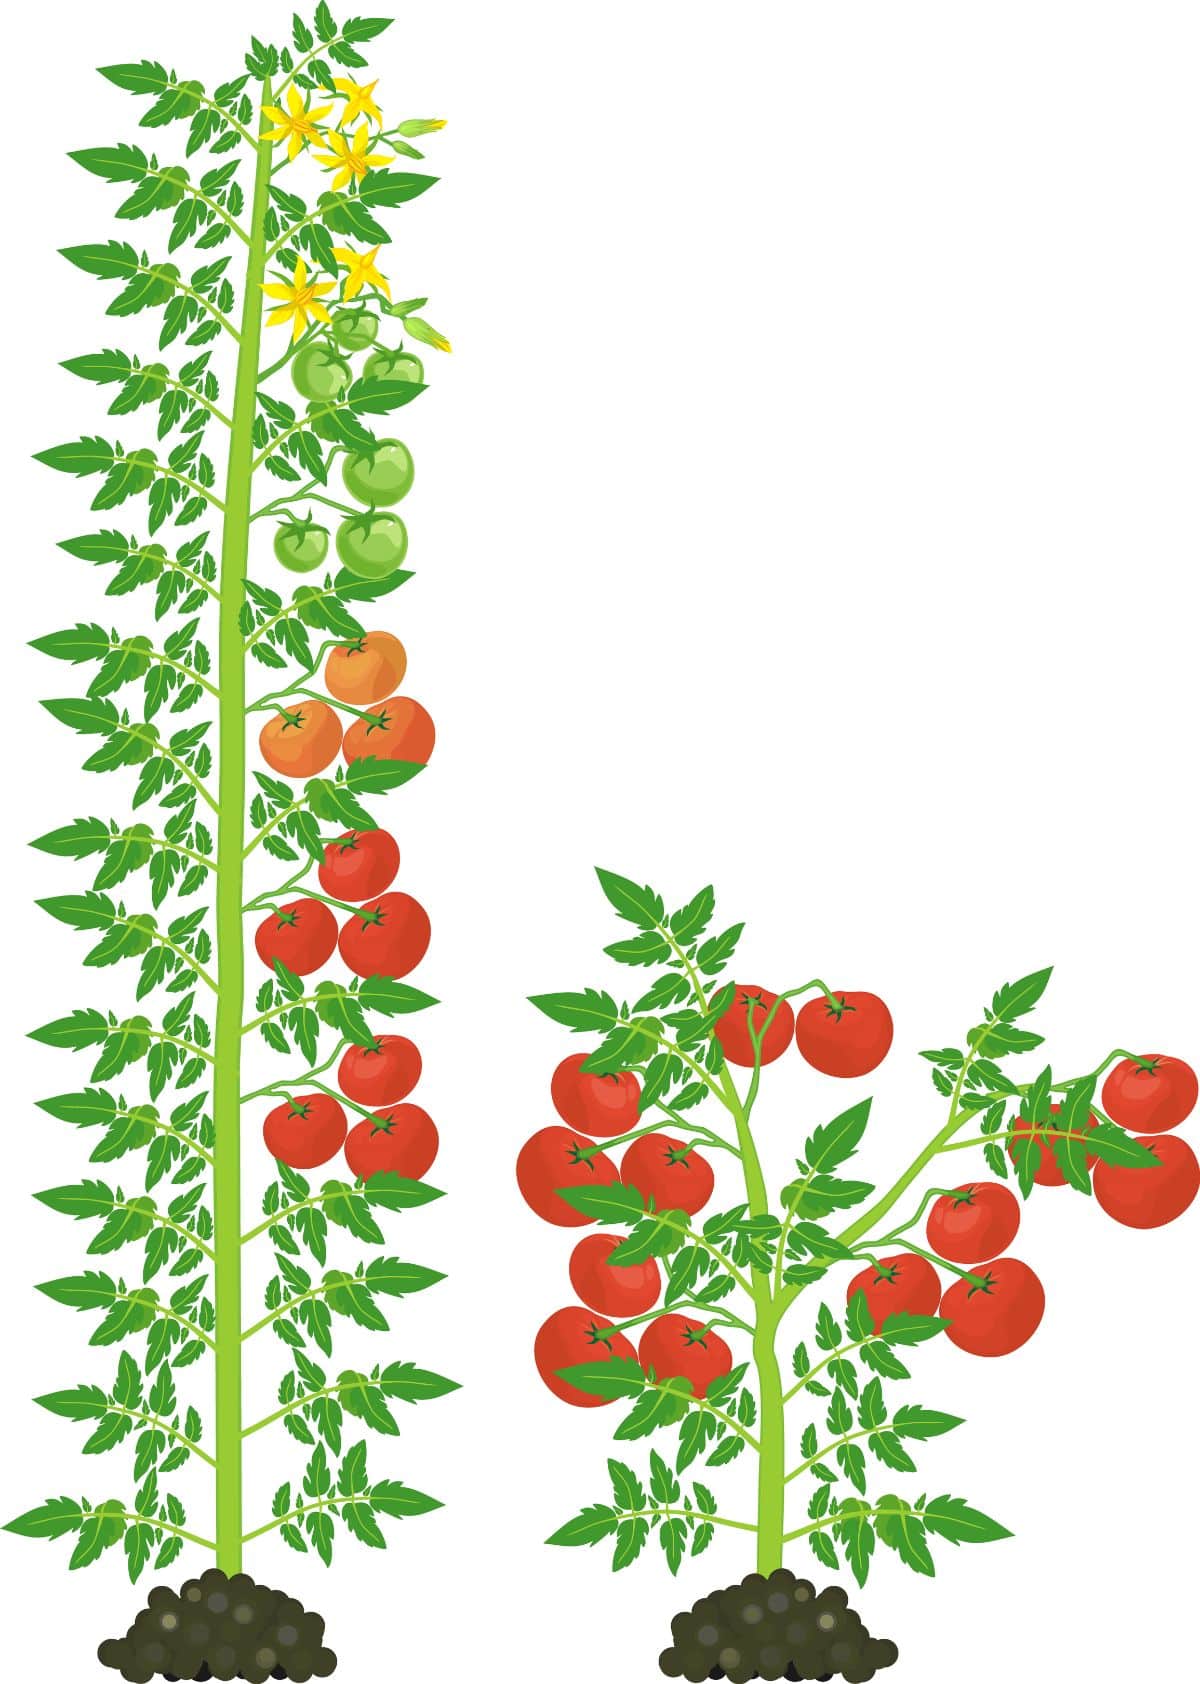 An image showing indeterminate versus determinate tomatoes